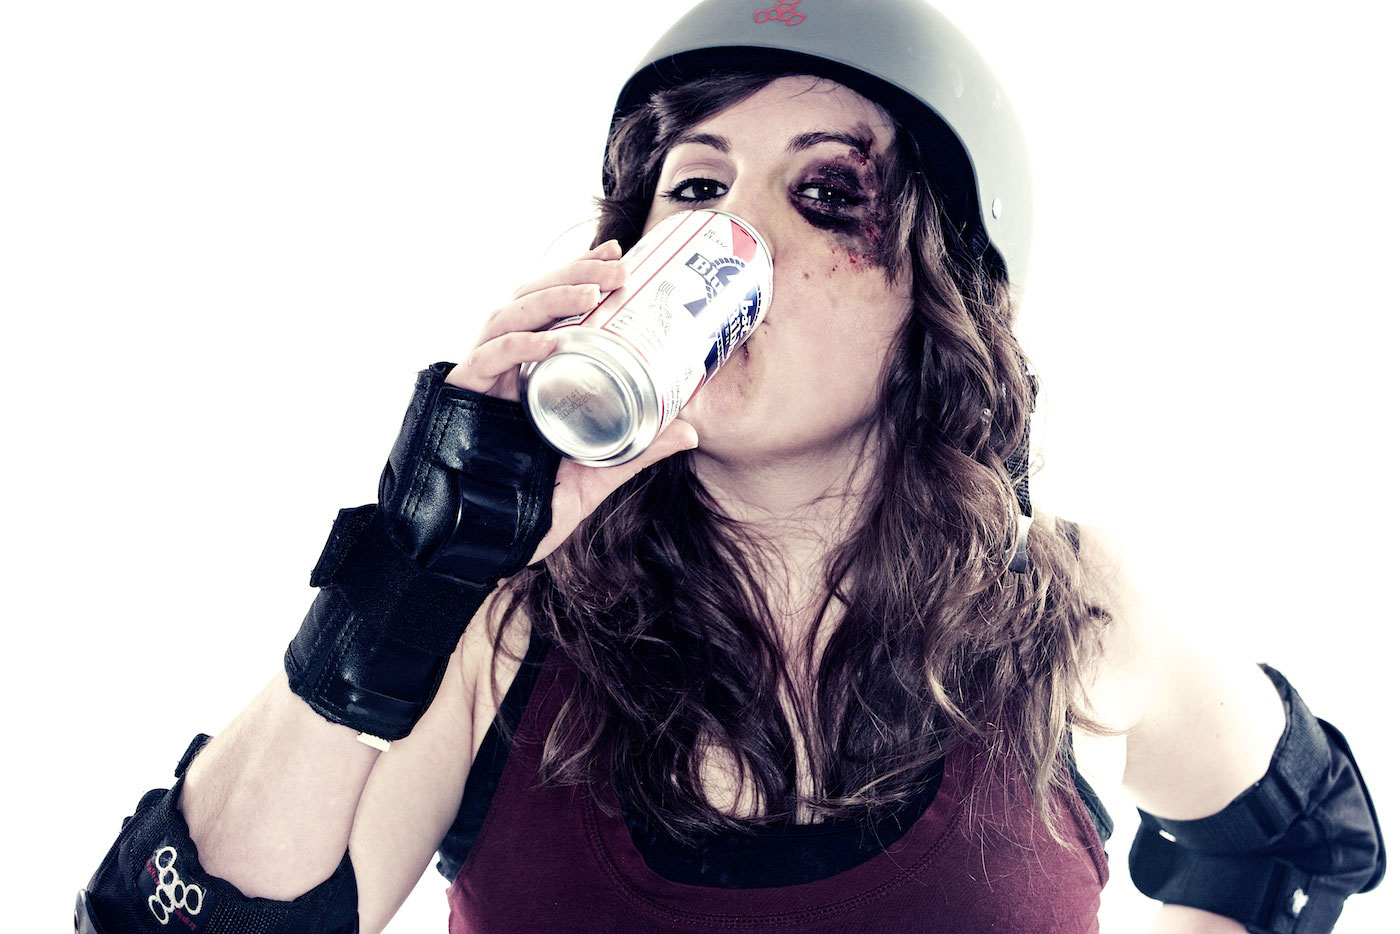 A roller derby woman with a black eye drinks a Pabst Blue Ribbon beer.